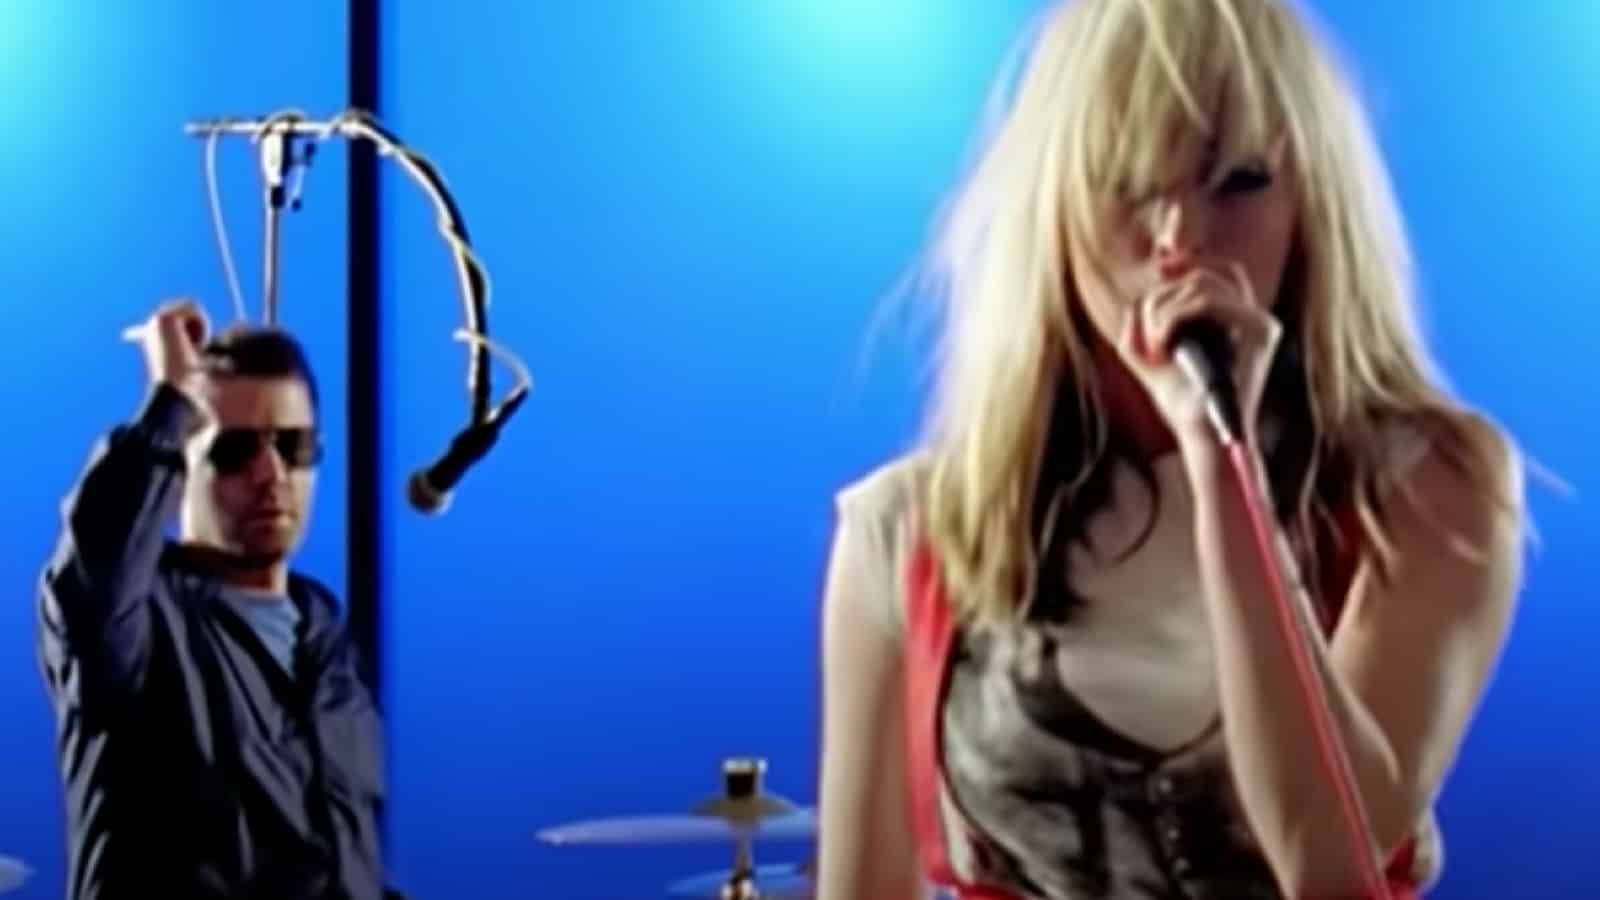 The Ting Tings in 'That's Not My Name' video